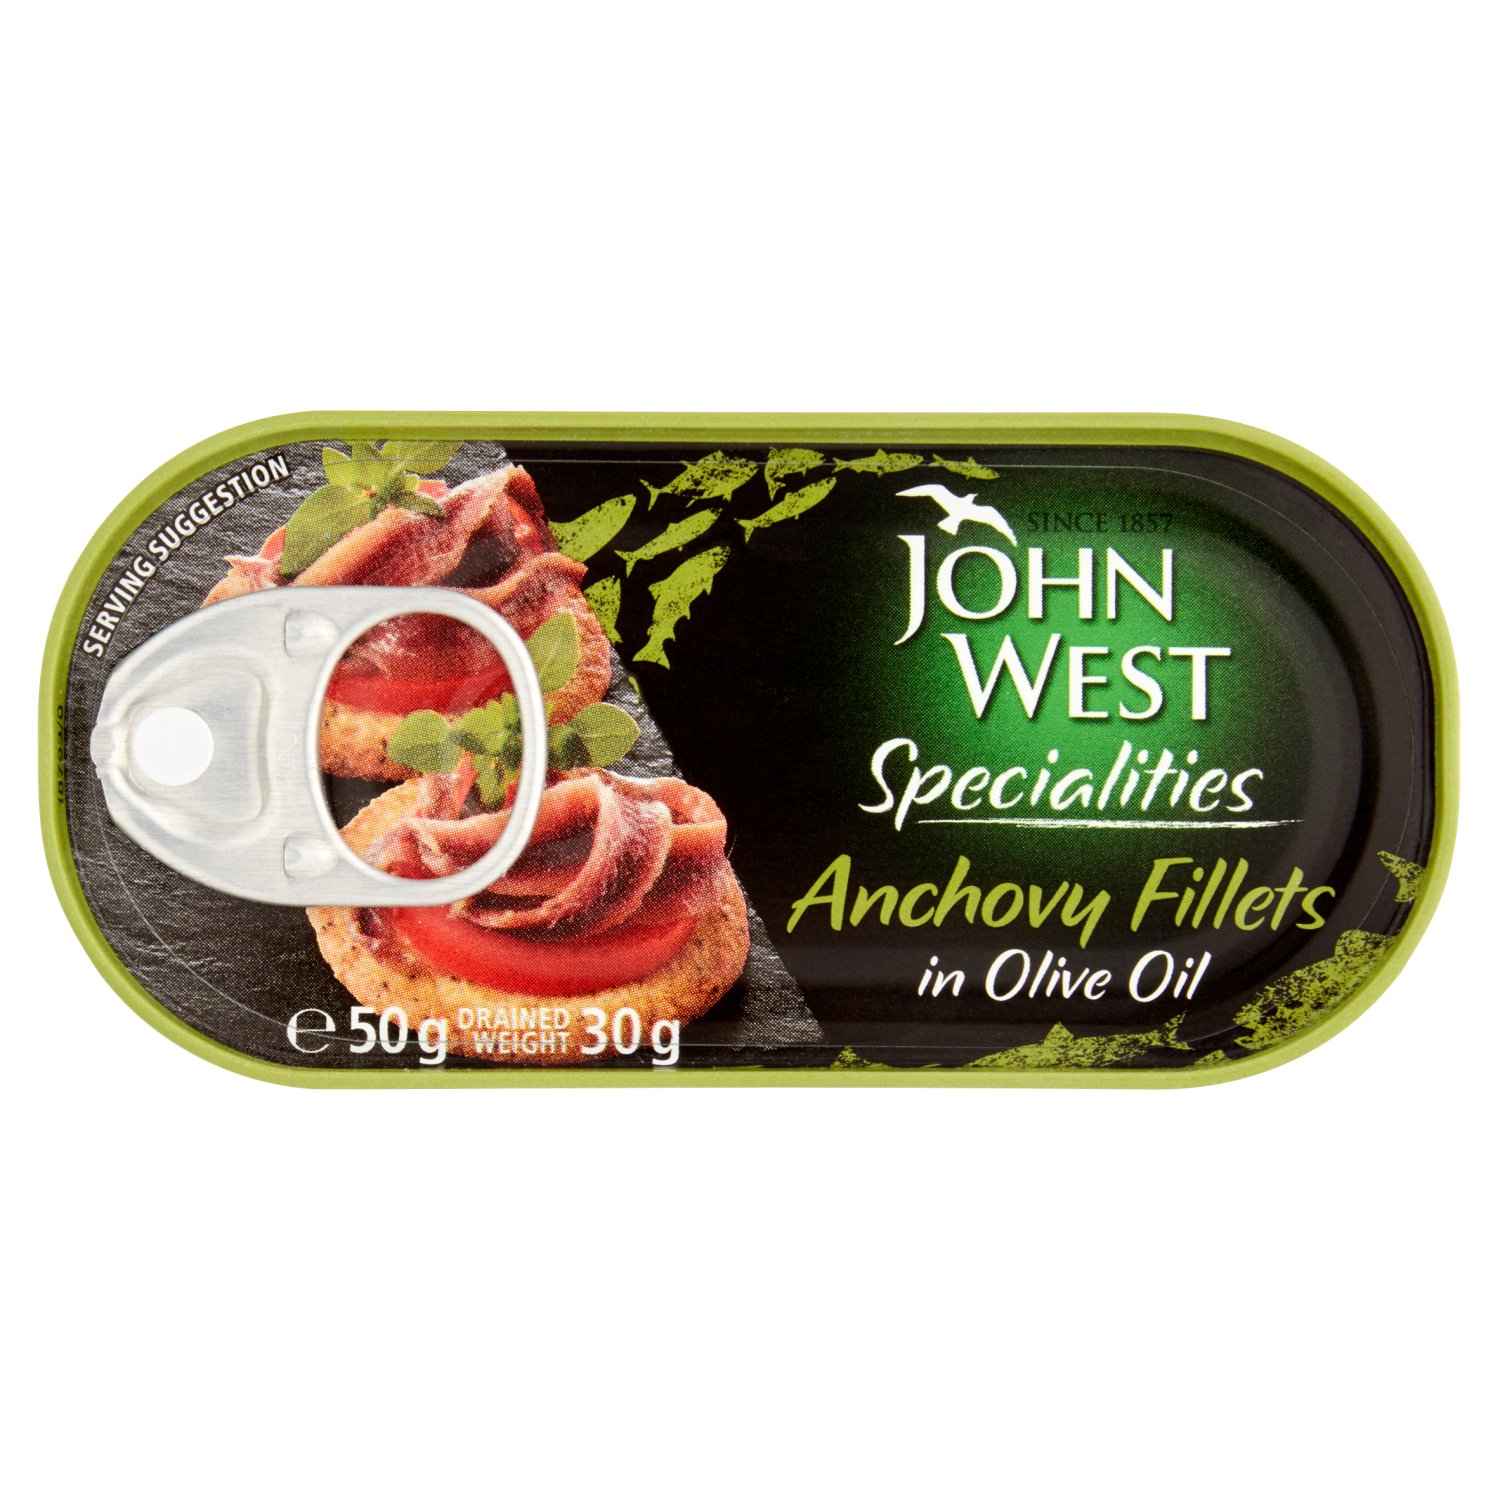 John West Specialities Anchovy Fillets in Olive Oil (50 g)